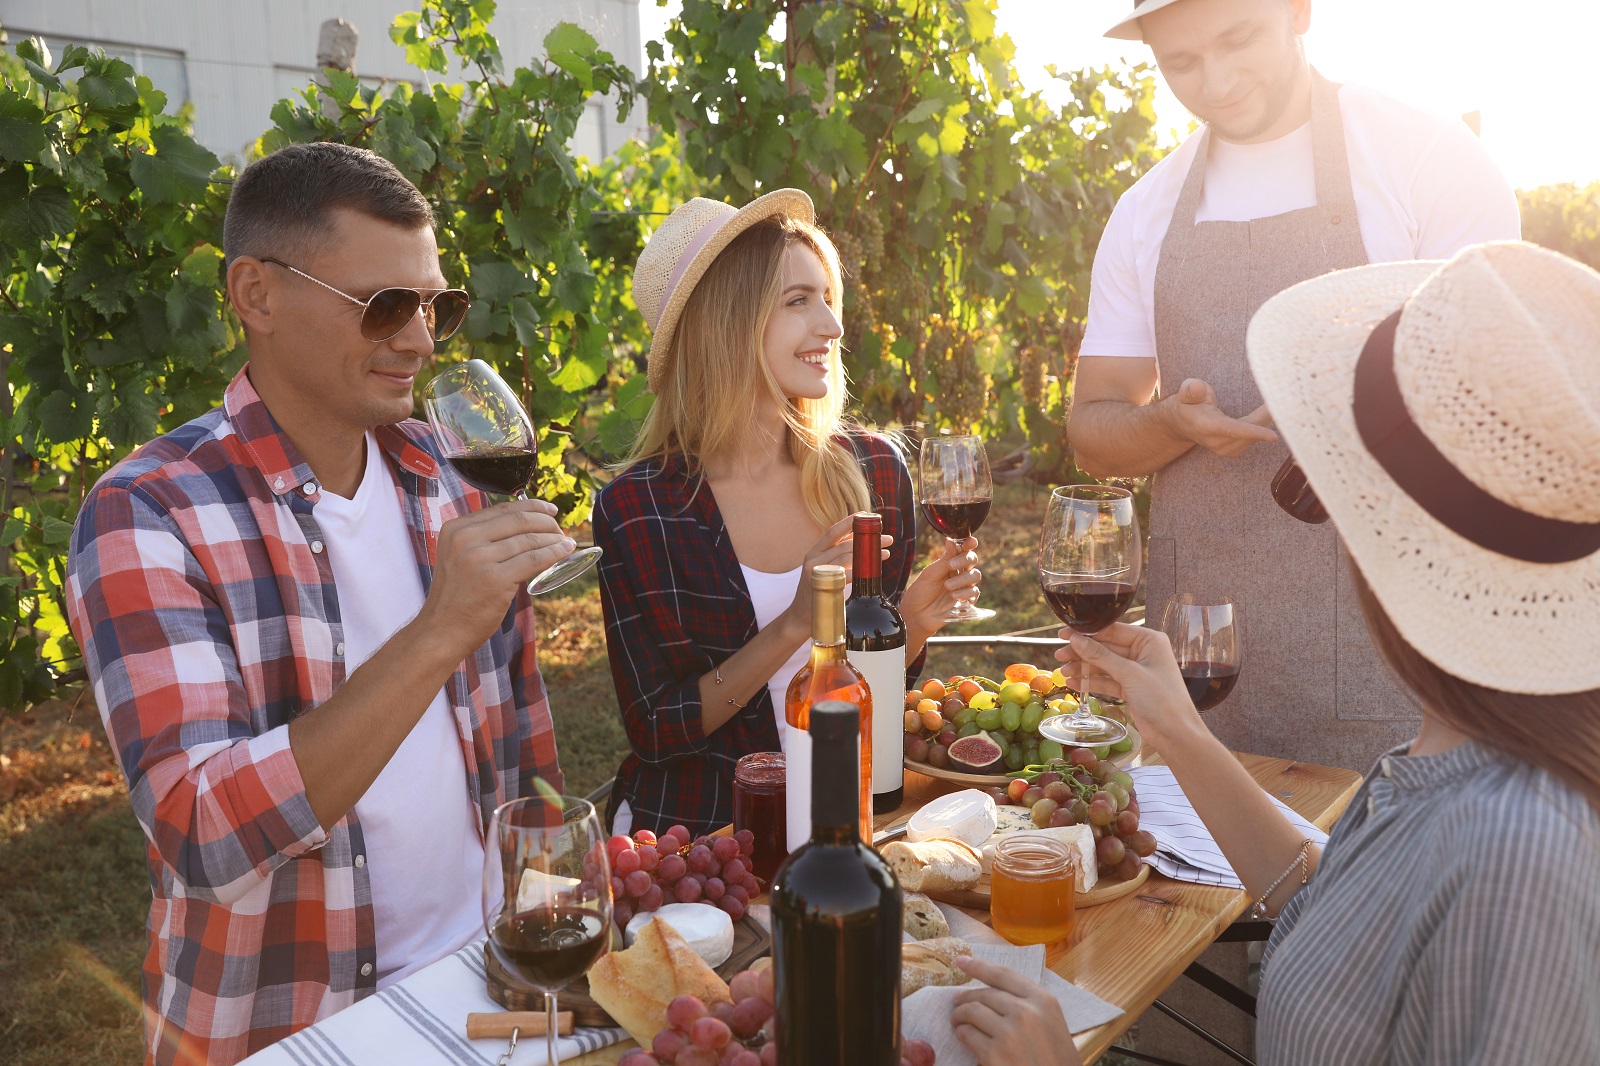 <p class="wp-caption-text">Image Credit: Shutterstock / New Africa</p>  <p><span>Exploring the world’s famous vineyards and wine regions offers more than just wine tasting; it’s a journey into the heart of each region’s culture, history, and natural beauty. Each destination on this list promises a unique and memorable wine-tasting experience set against some of the most picturesque landscapes on the planet. Whether you’re a seasoned connoisseur or a casual wine lover, these destinations will surely enrich your love for wine and travel.</span></p> <p><span>The post <a href="https://mechanicinsider.com/wine-explorers-guide-to-the-worlds-best-vineyards">The Wine Explorer’s Guide to the World’s Best Vineyards</a>  first appeared on <a class="in-cell-link" href="https://mechanicinsider.com/" rel="noopener">Mechanic Insider</a>.<br> </span></p> <p><span>Featured Image Credit: Shutterstock / RossHelen.<br> </span></p> <p><span>For transparency, this content was partly developed with AI assistance and carefully curated by an experienced editor to be informative and ensure accuracy.<br> </span></p>